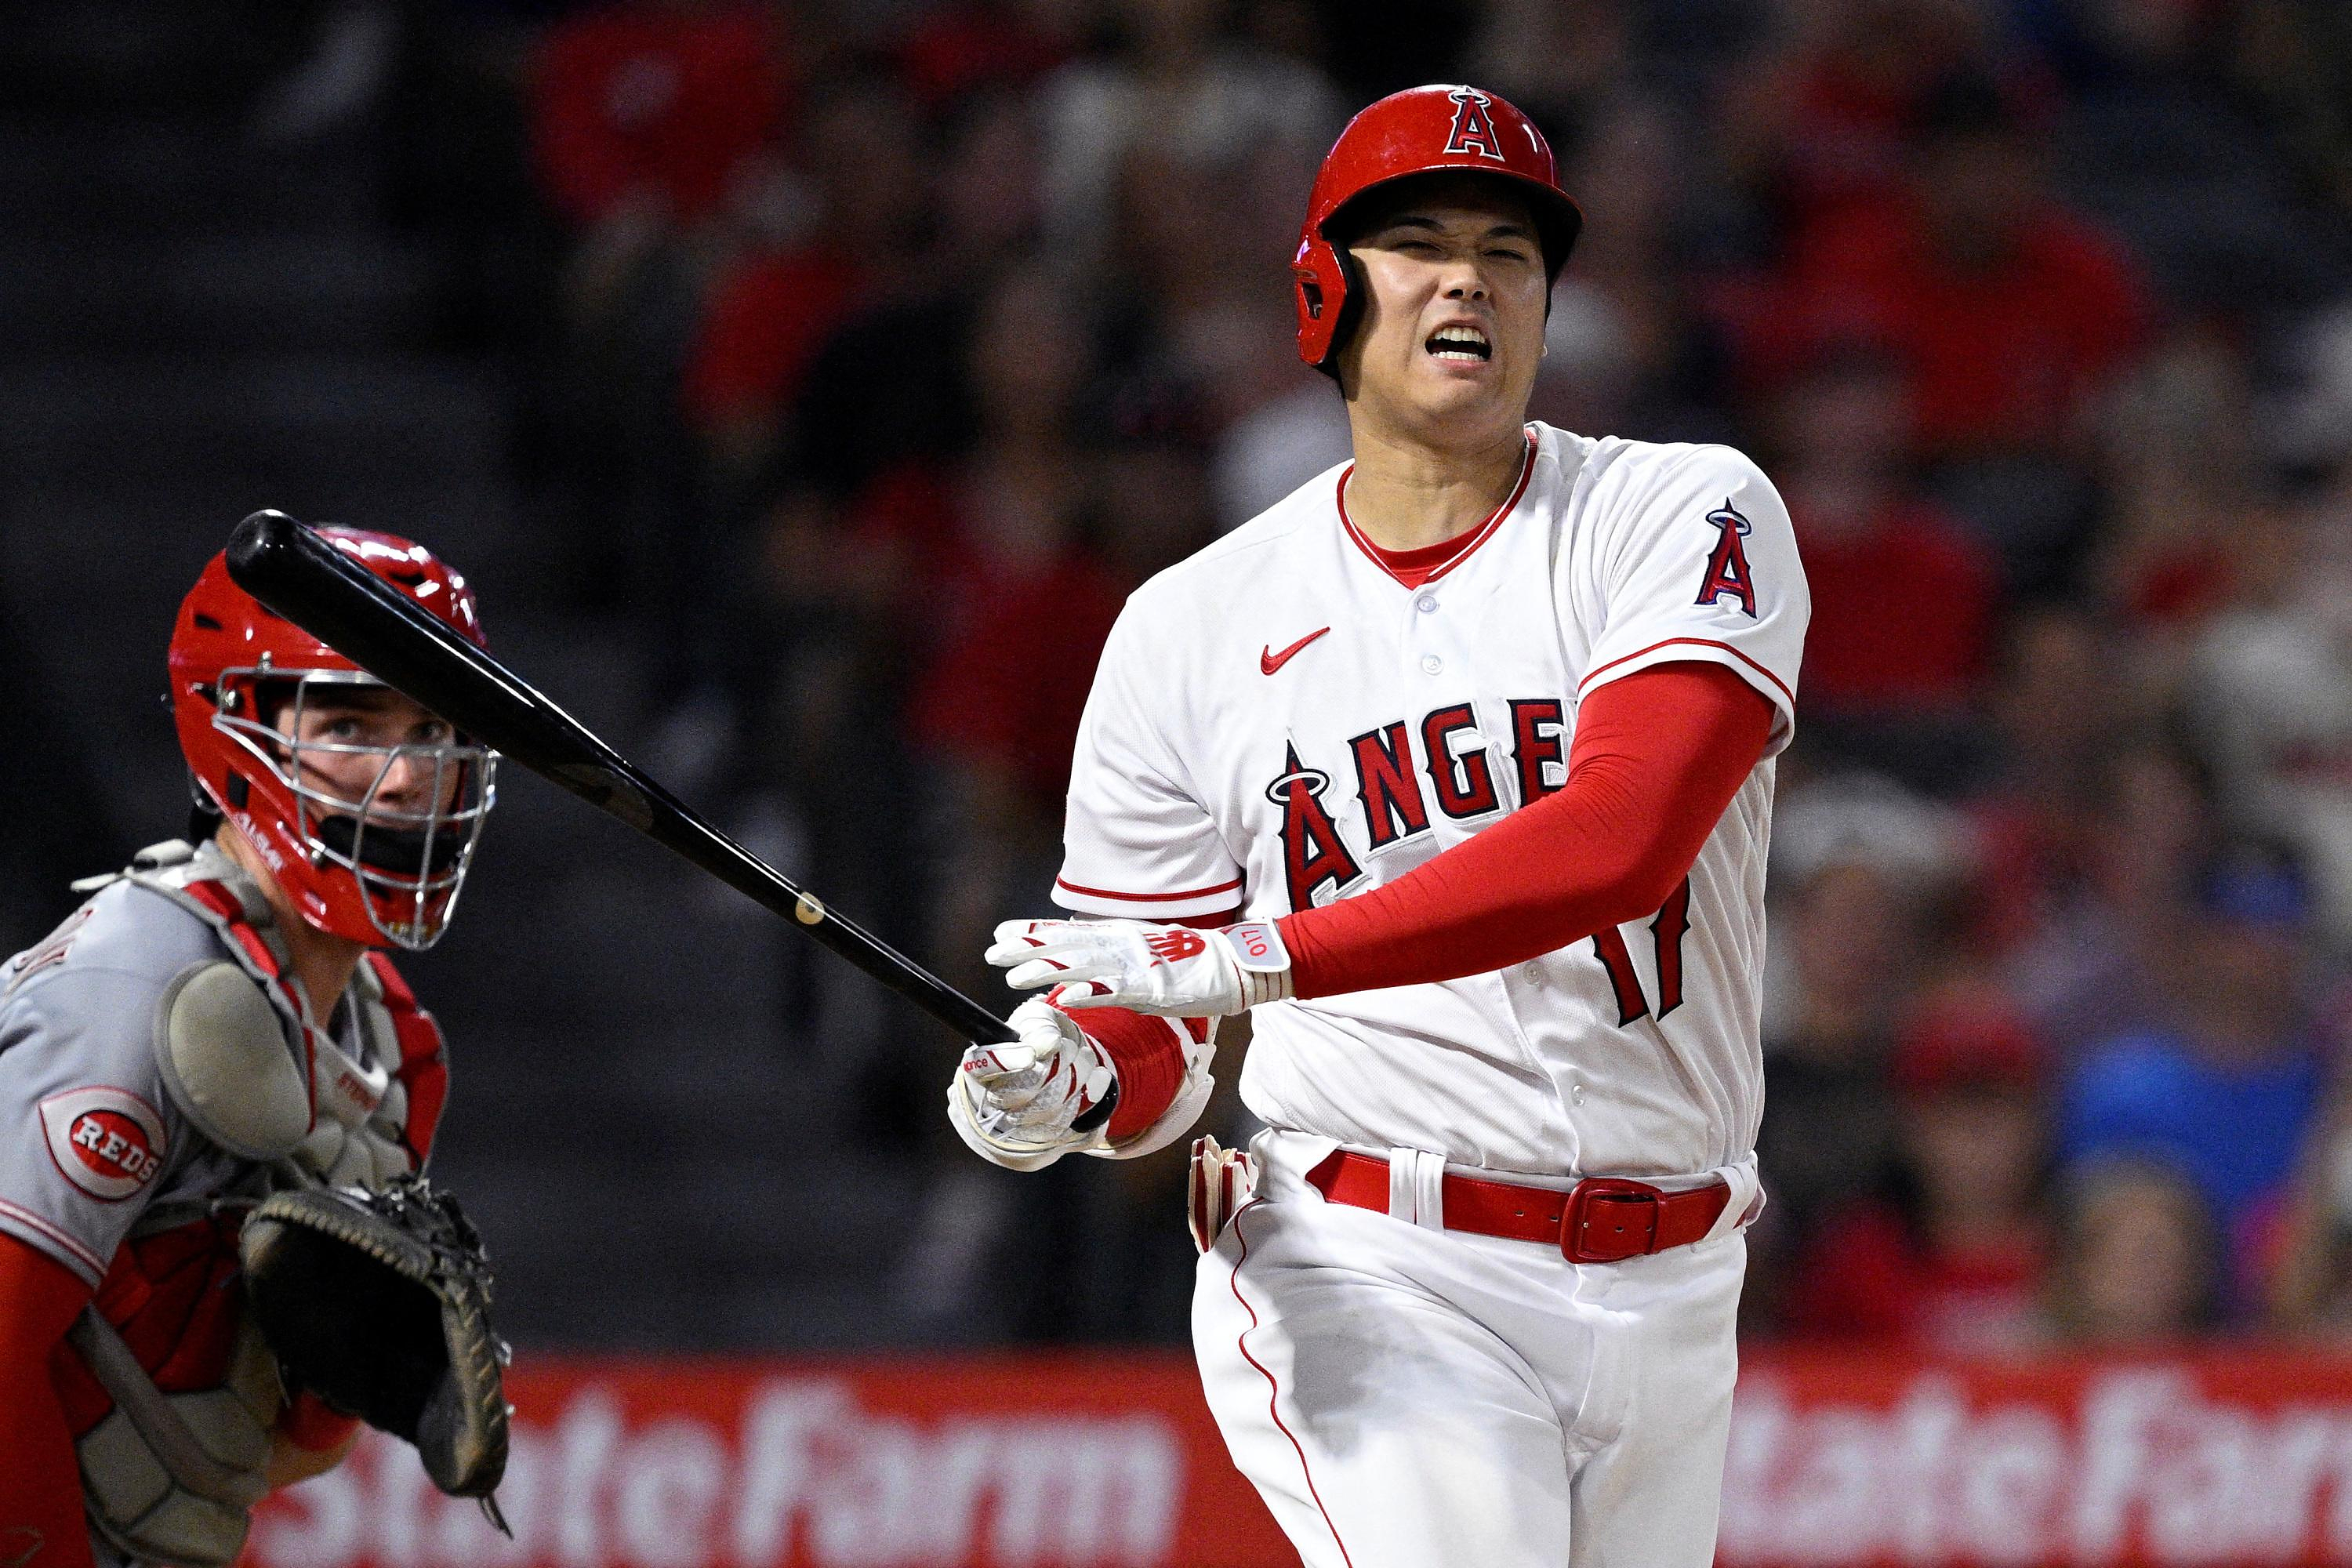 Baseball: Japanese superstar Shohei Ohtani signs record contract with Dodgers